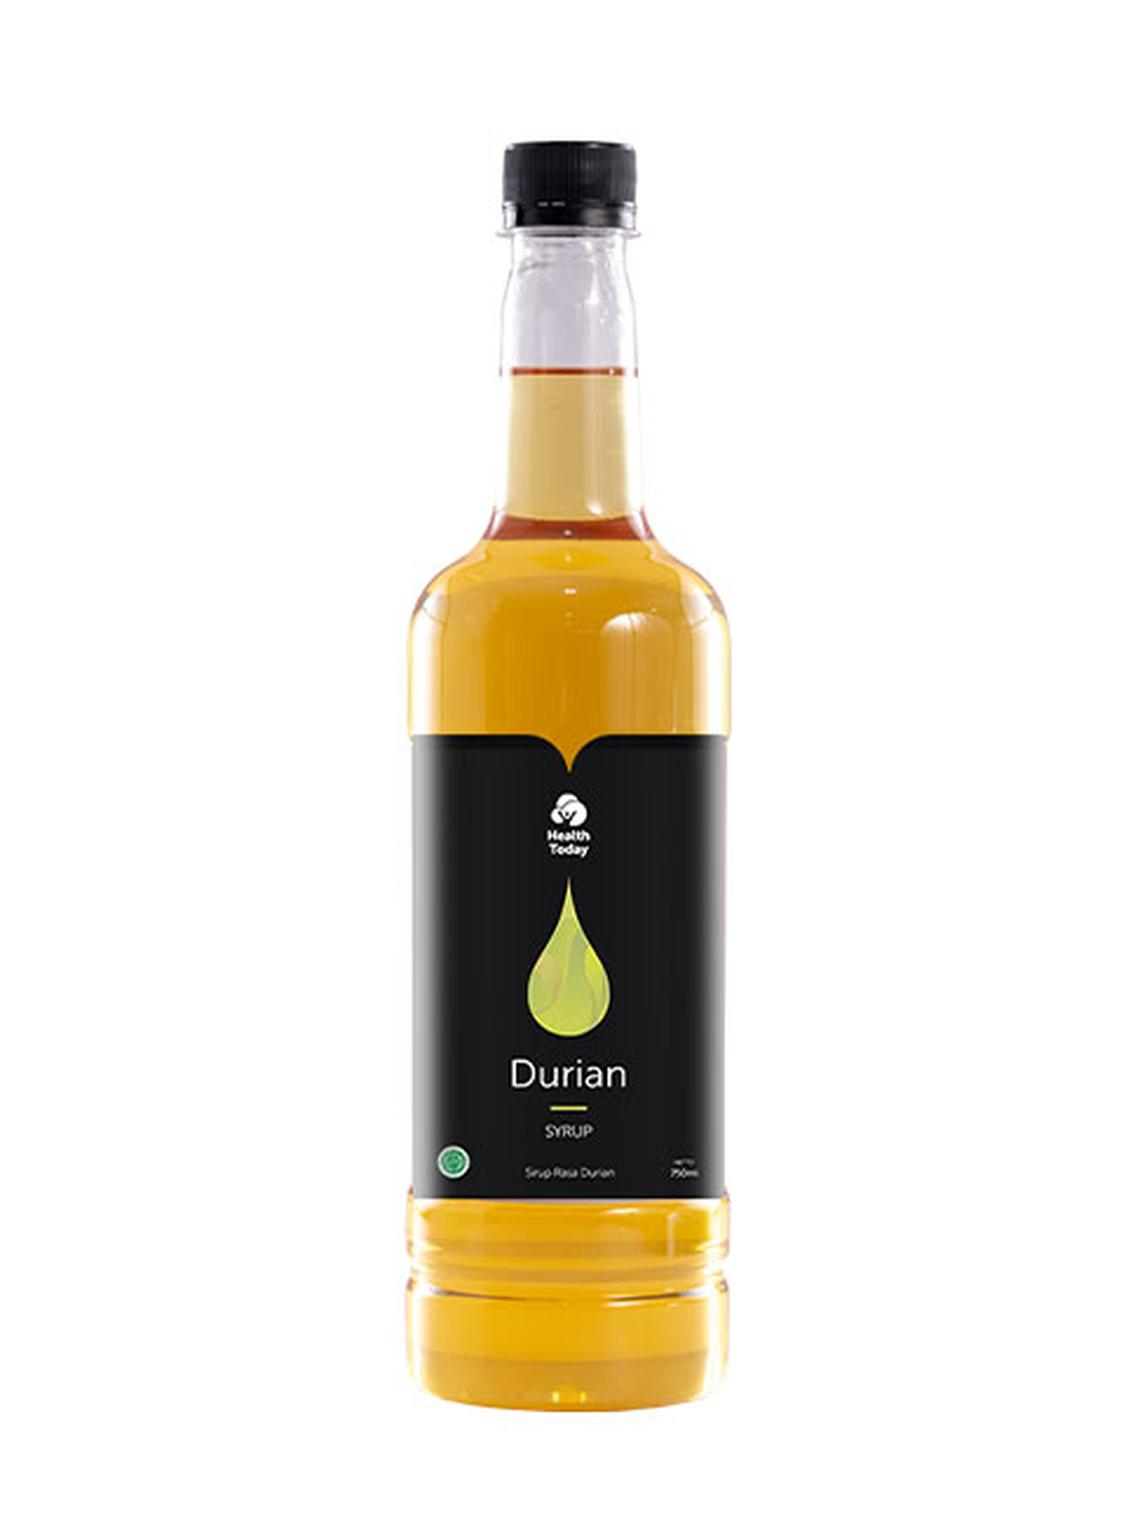 Health Today Syrup Durian 750 ml